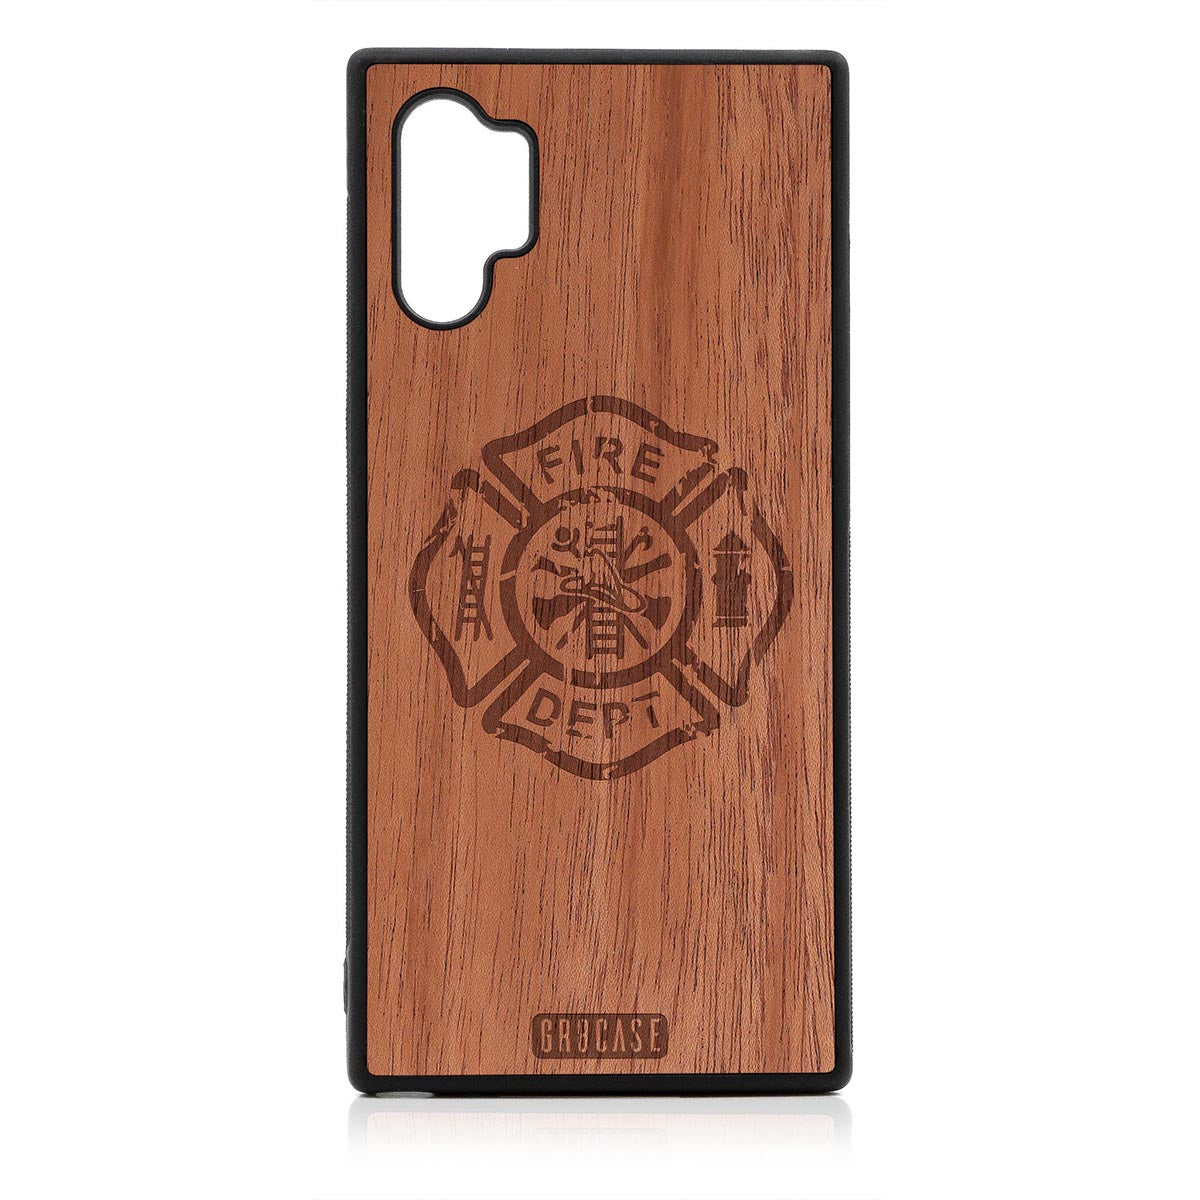 Fire Department Design Wood Case Samsung Galaxy Note 10 Plus by GR8CASE